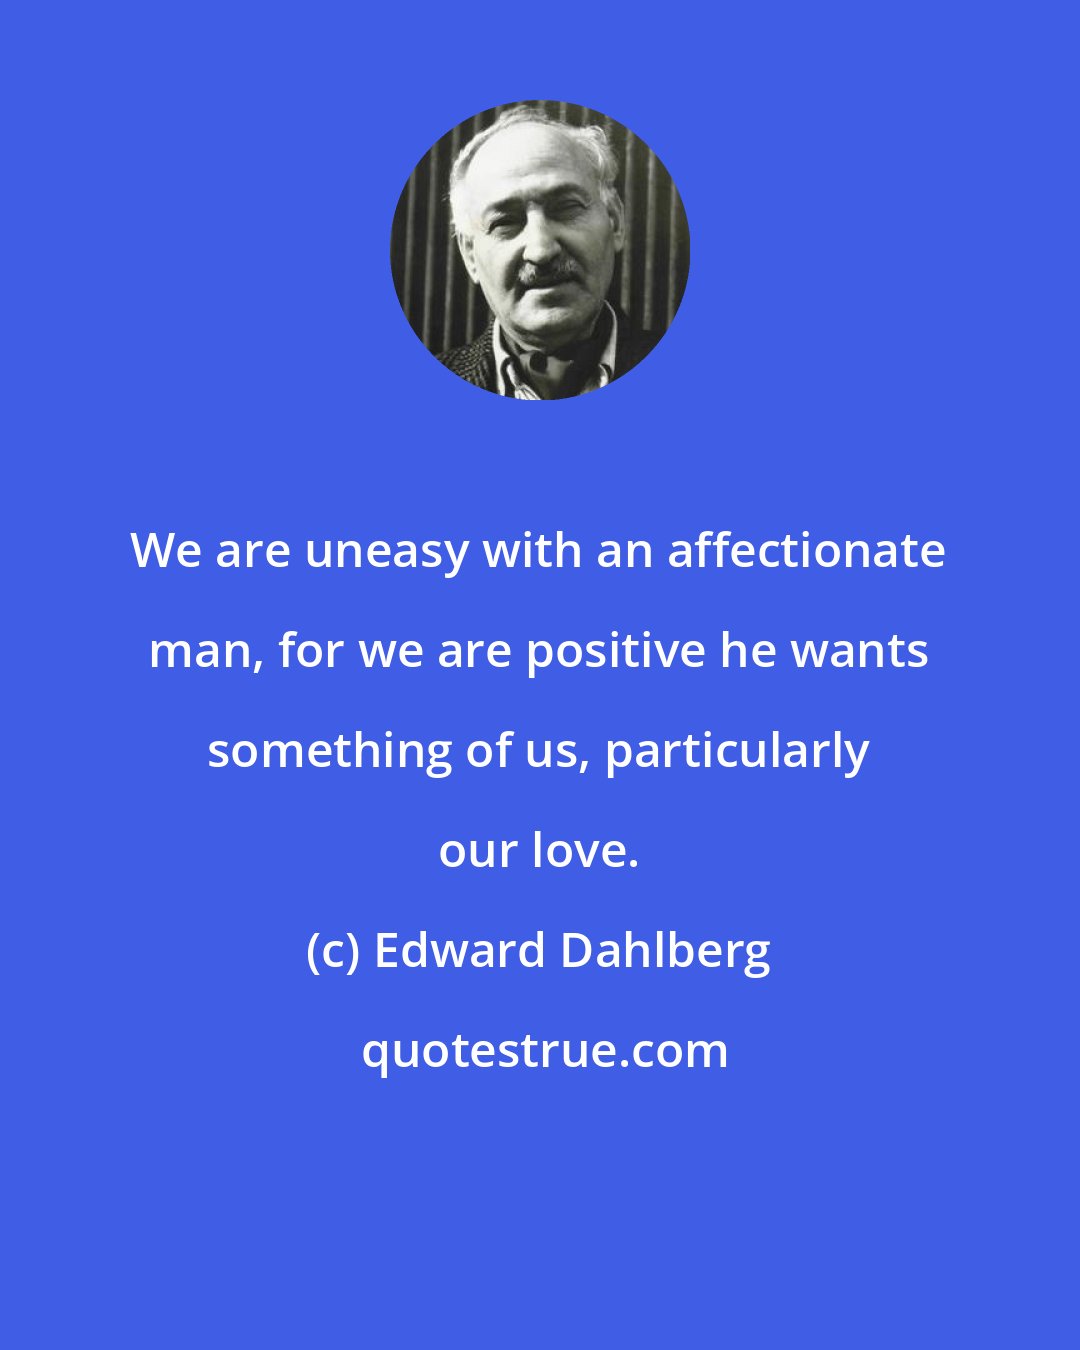 Edward Dahlberg: We are uneasy with an affectionate man, for we are positive he wants something of us, particularly our love.